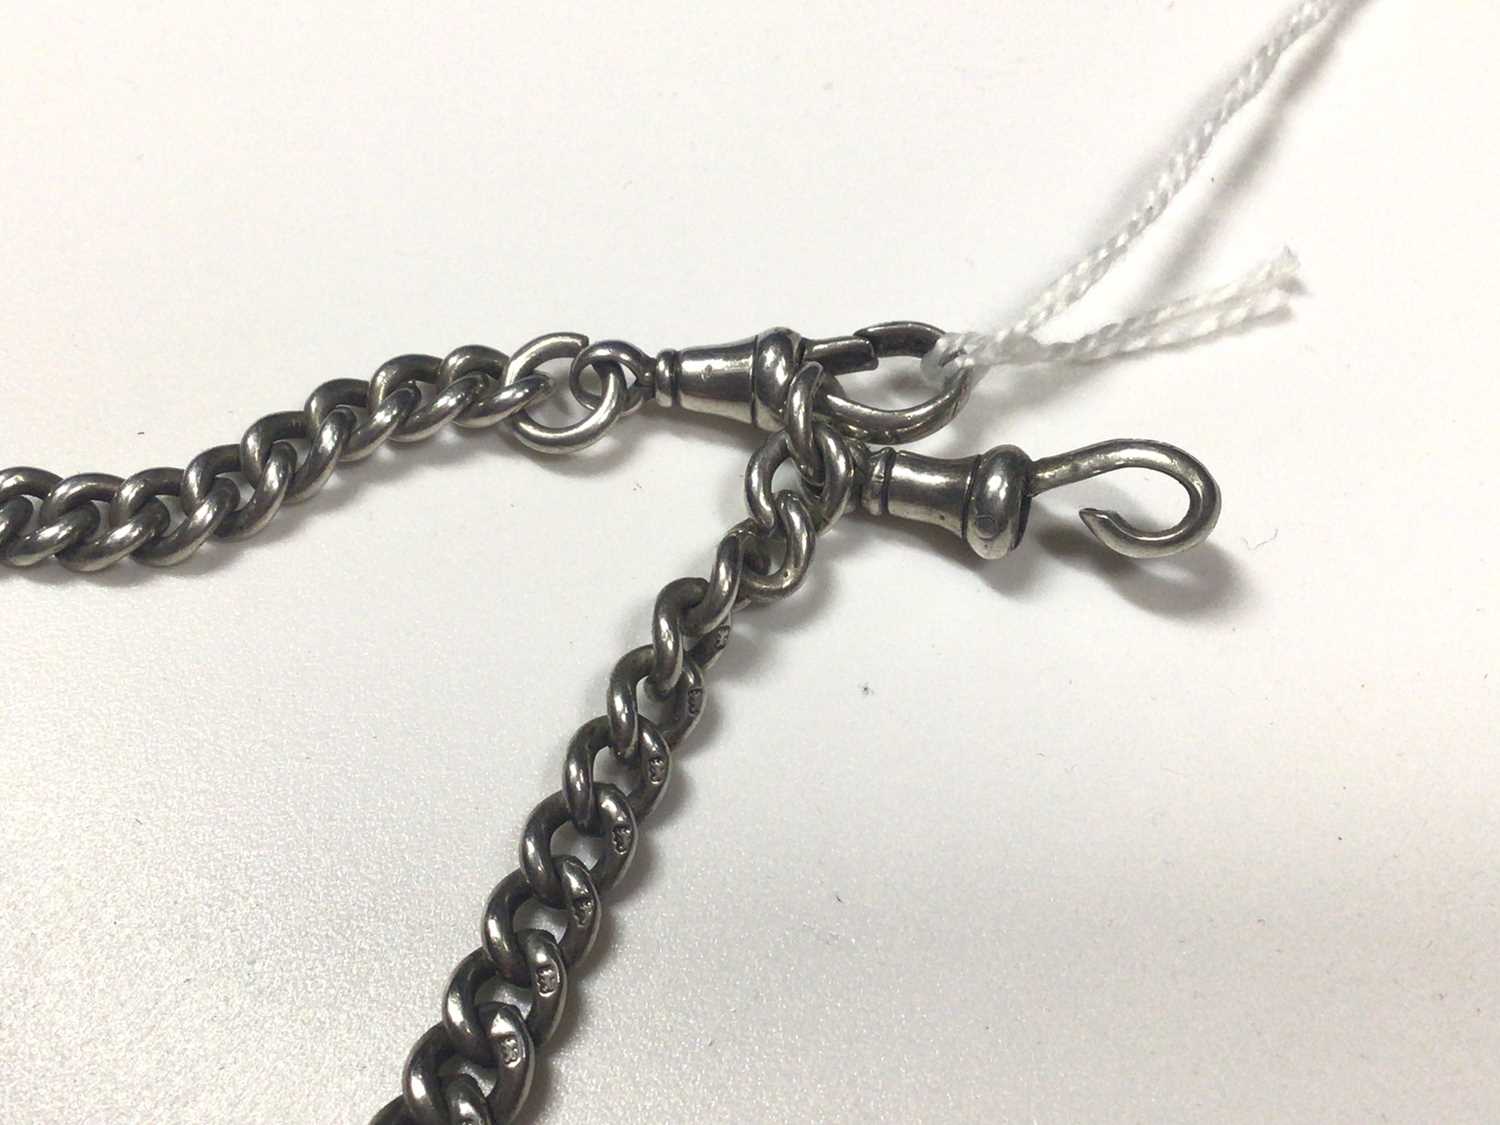 Edwardian silver curb link watch chain/necklace with a silver fob - Image 3 of 3